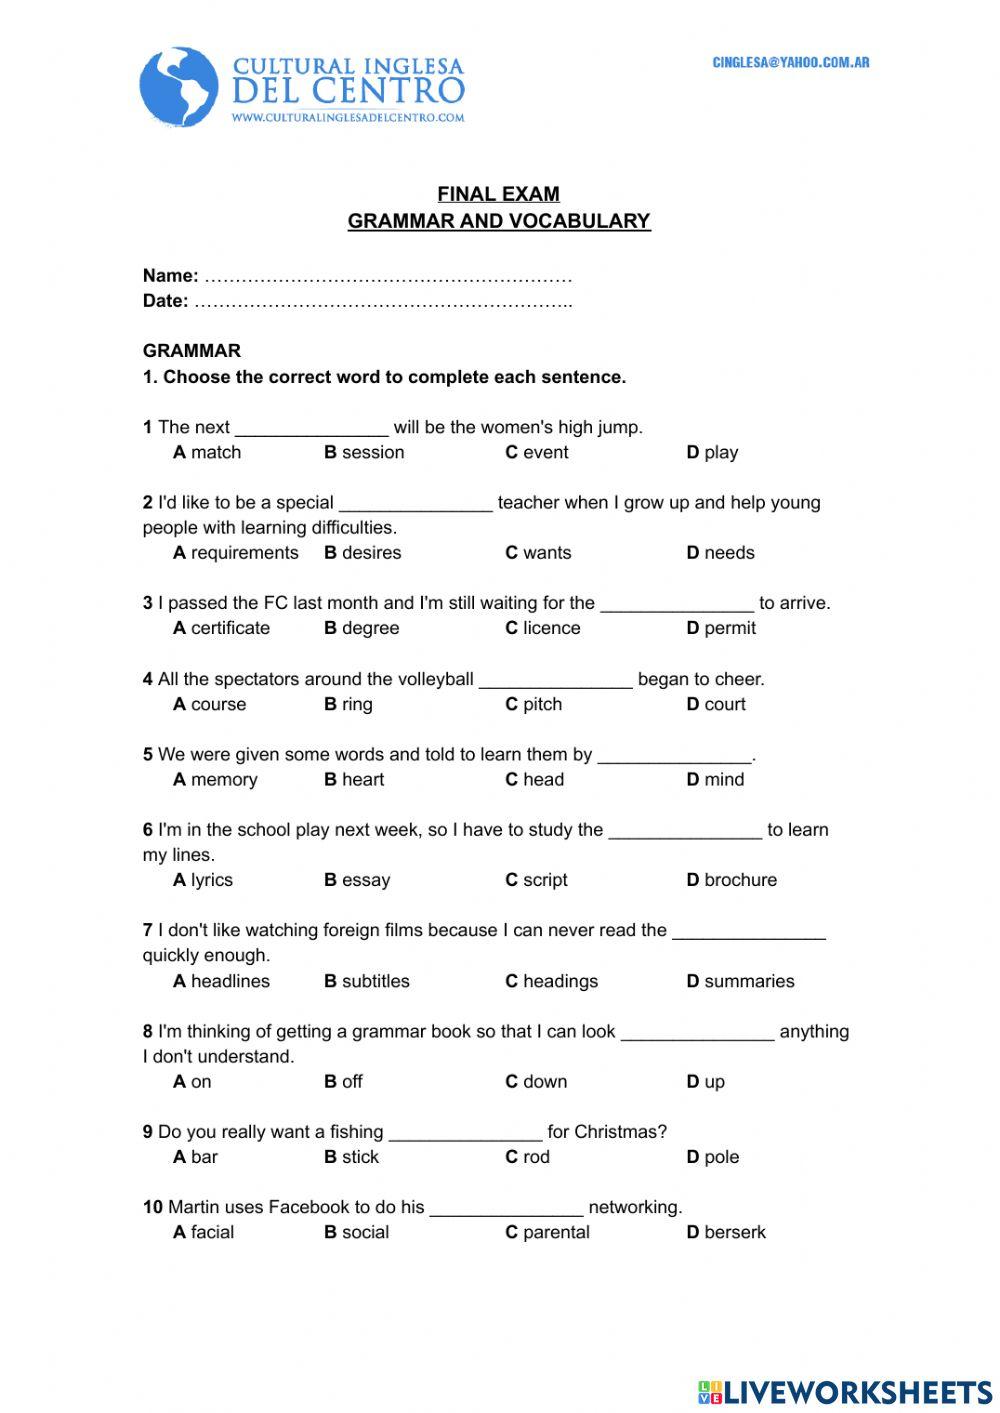 FINAL TEST - Grammar and Vocabulary (6th Adolescent)